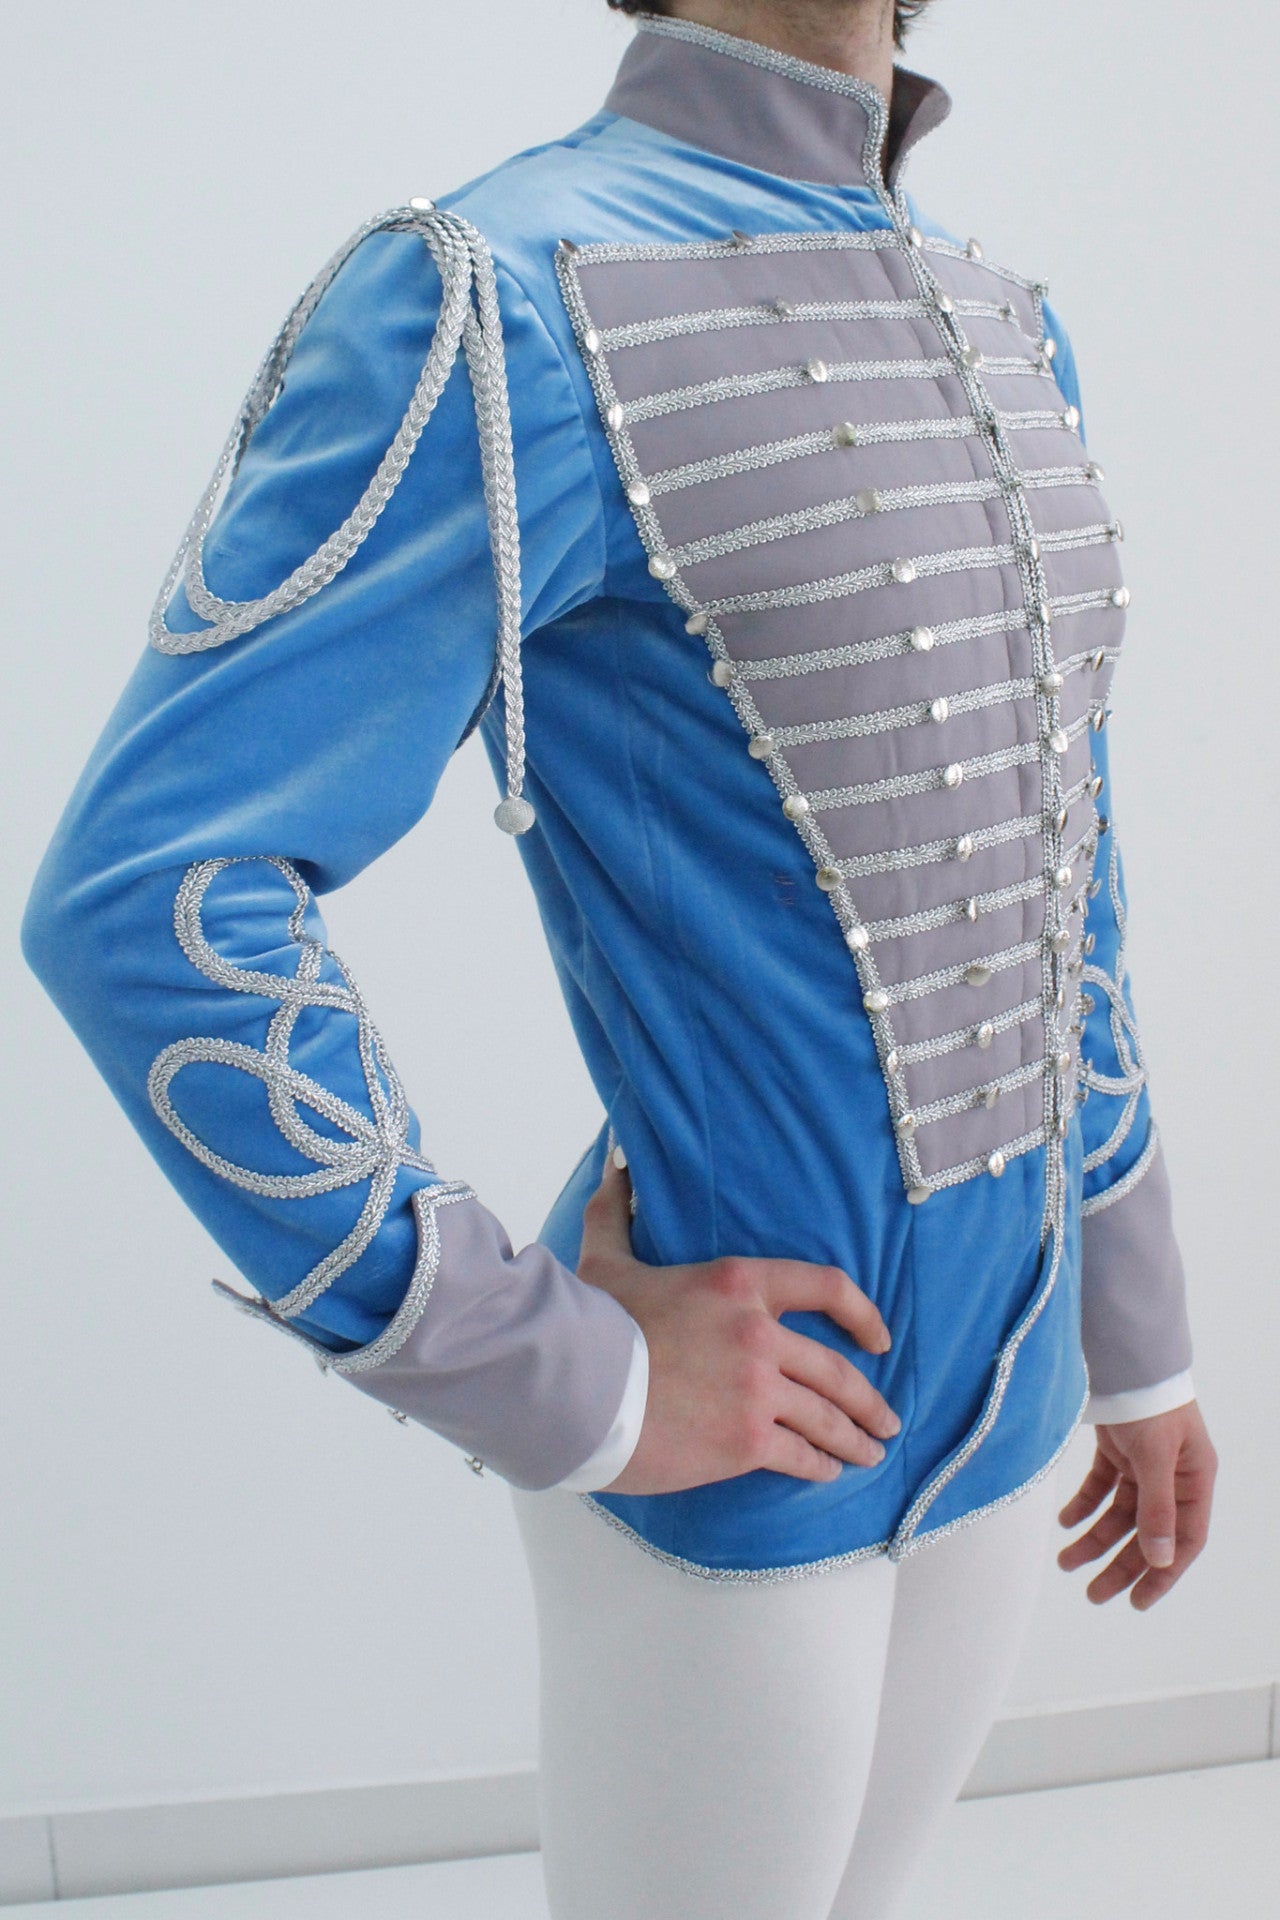 "Lucien" Male Professional Costume - Dancewear by Patricia